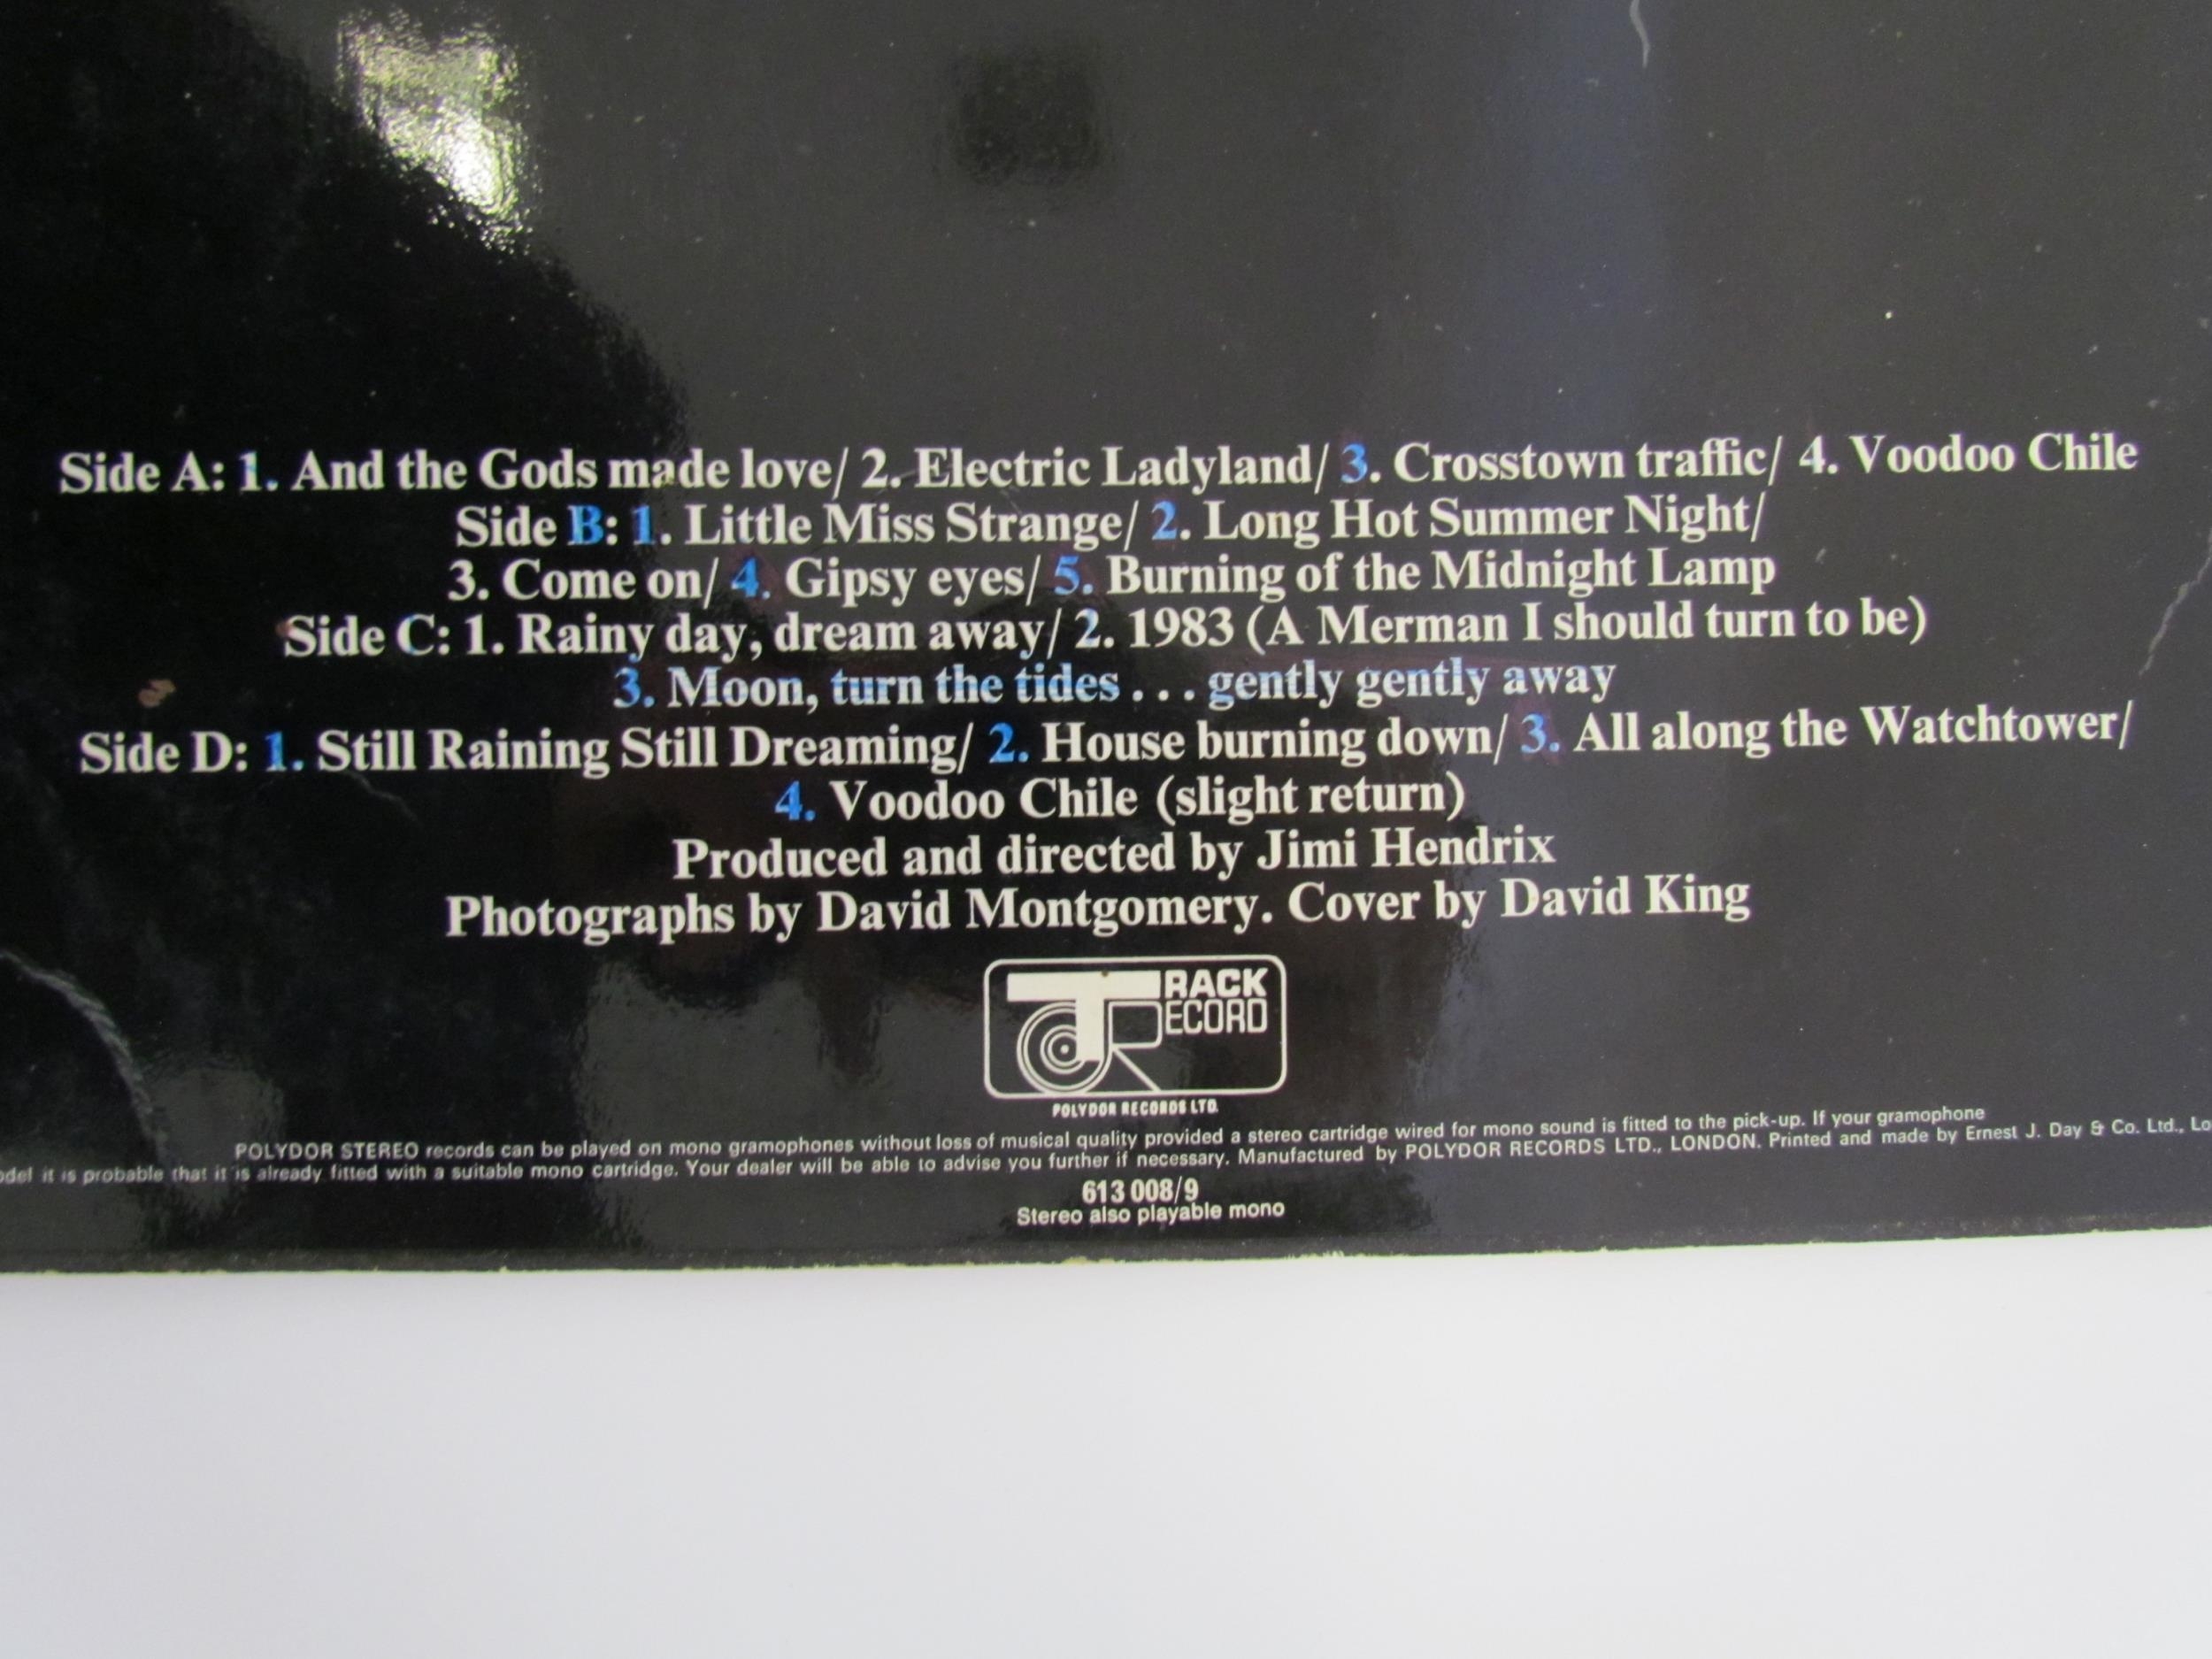 THE JIMI HENDRIX EXPERIENCE: 'Electric Ladyland' double LP, original UK pressing on Track Record, - Image 4 of 9